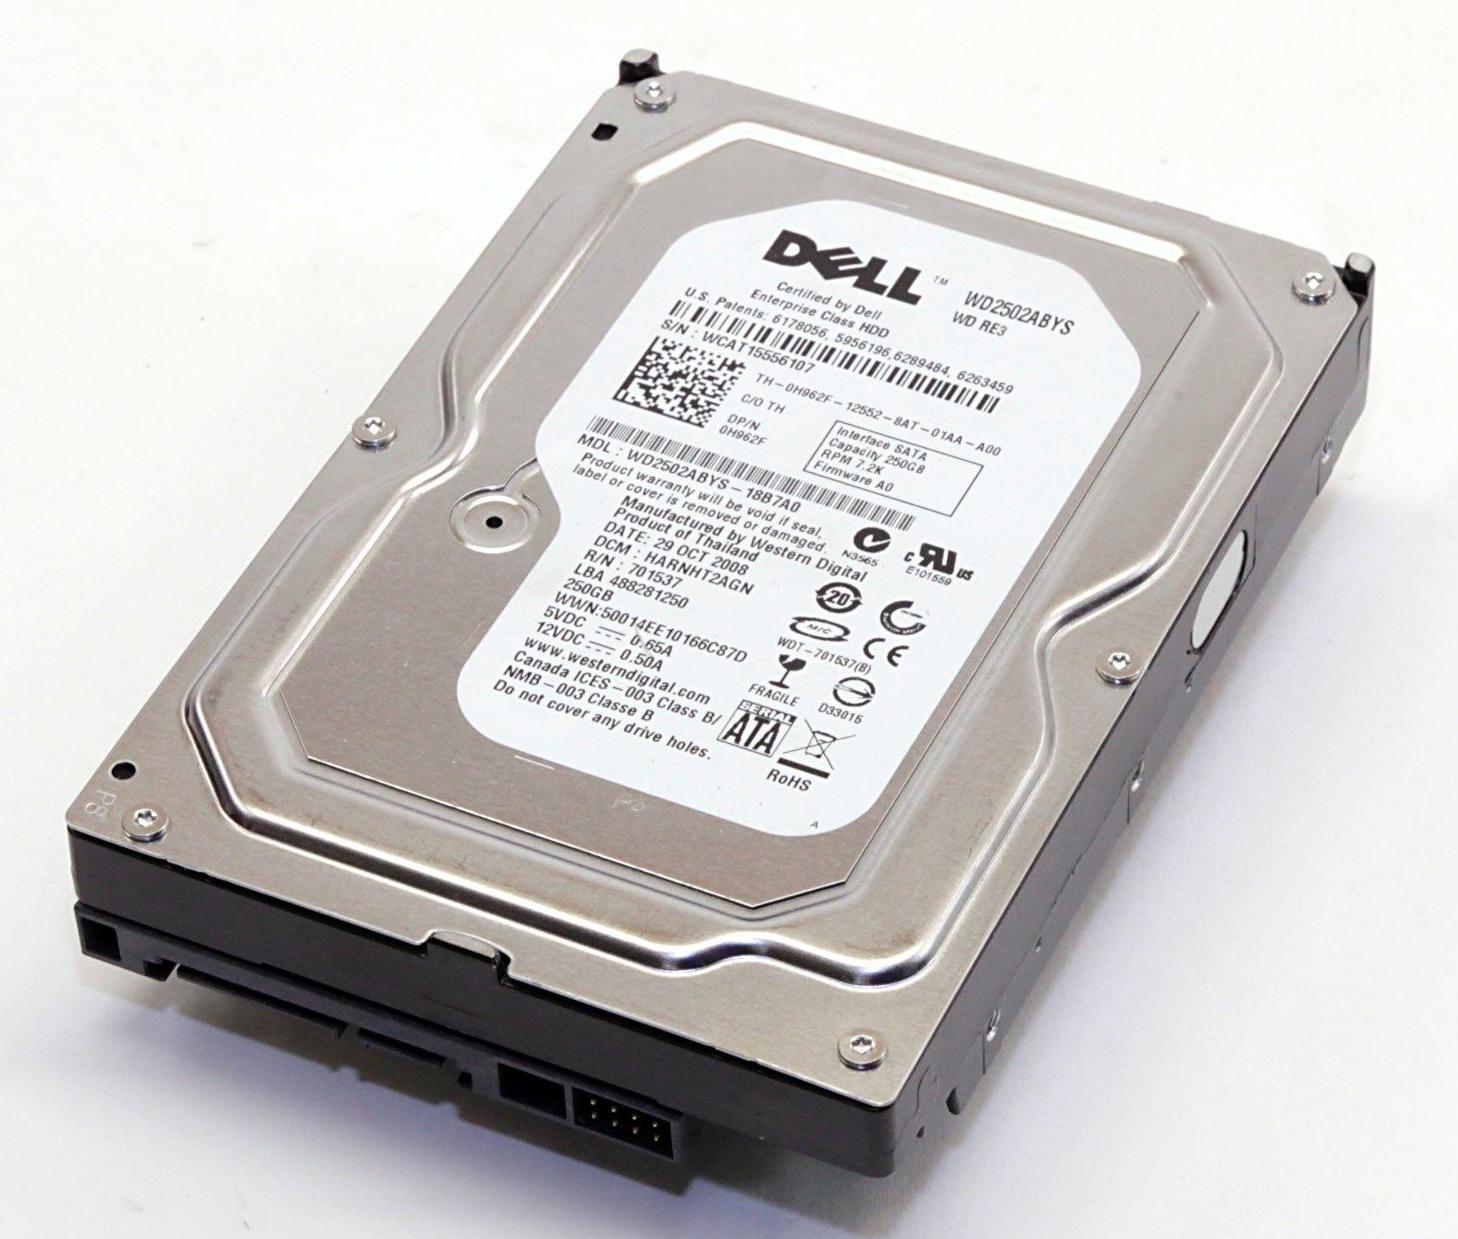 W39xn Dell 600gb 15k Rpm Sas-12gbps 25 Inch Form Factor Hot-plug Hard Disk Drive With Tray For Poweredge & Powervault Server